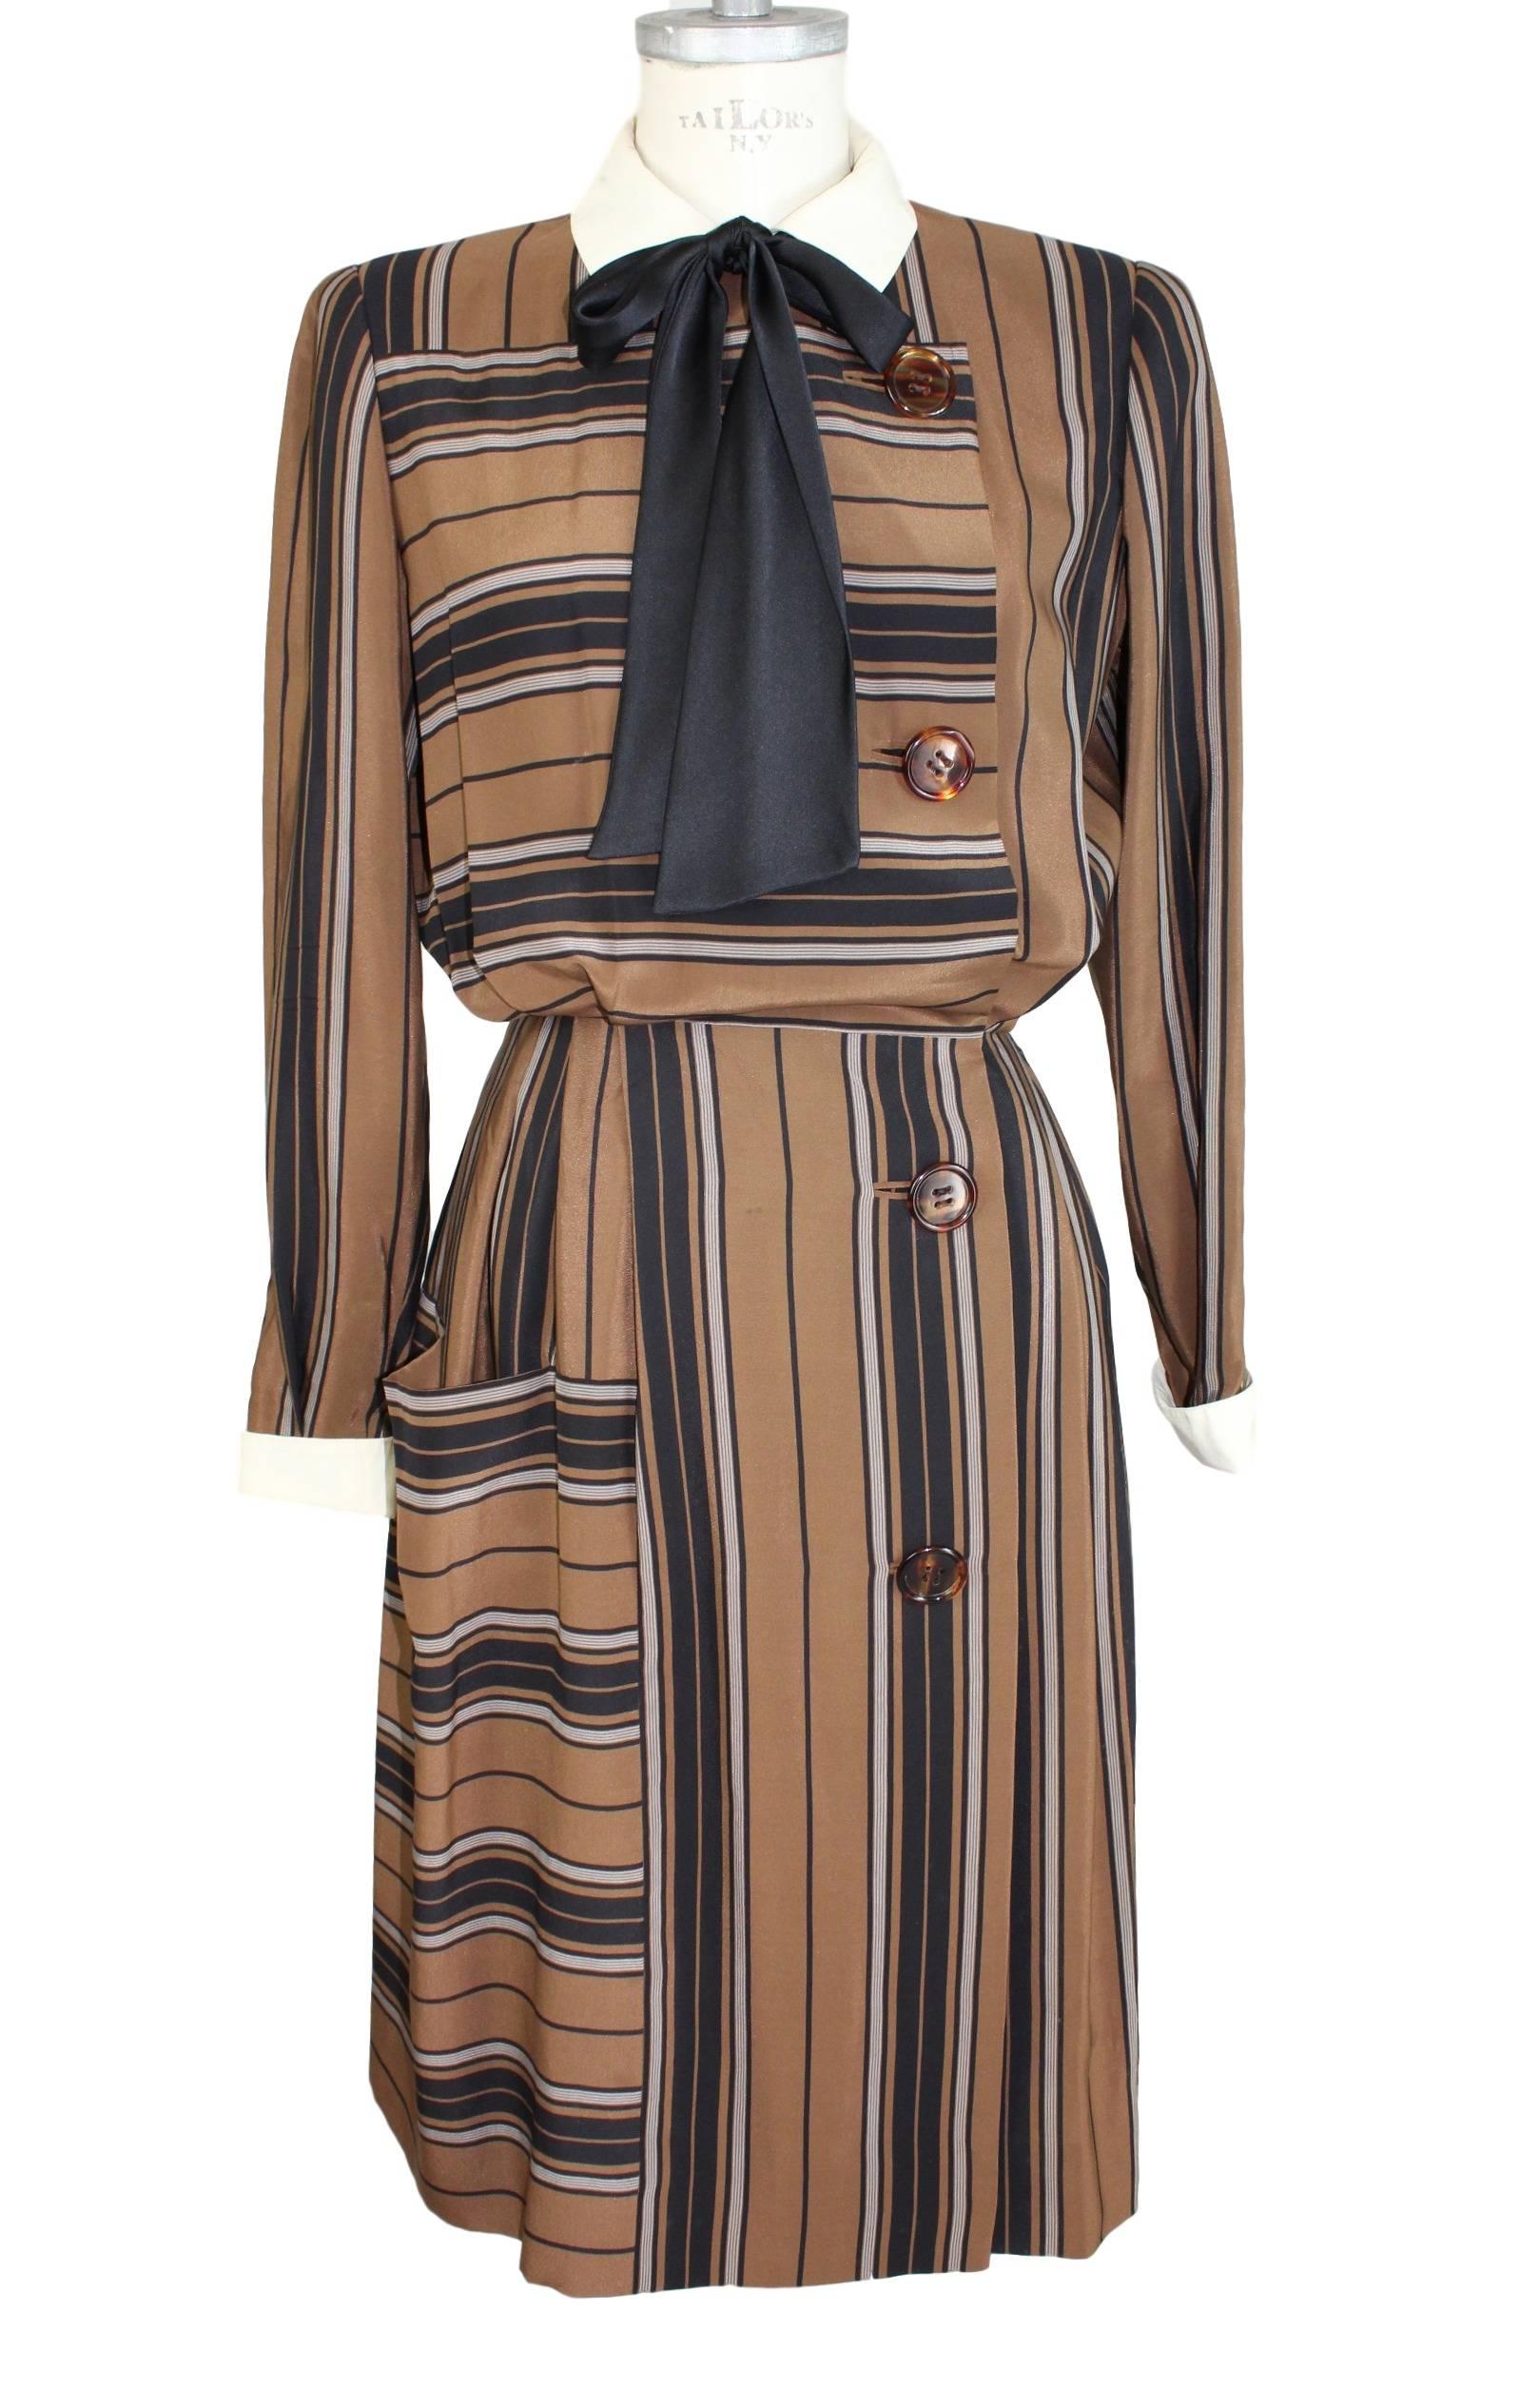 Salvatore Ferragamo dress vintage 1980s, 100% pure silk, brown and black stripes. Front pocket. The dress closes with laterally buttons and clips. Fully lined. Collar classic ivory color. Excellent vintage condition.

Size 44